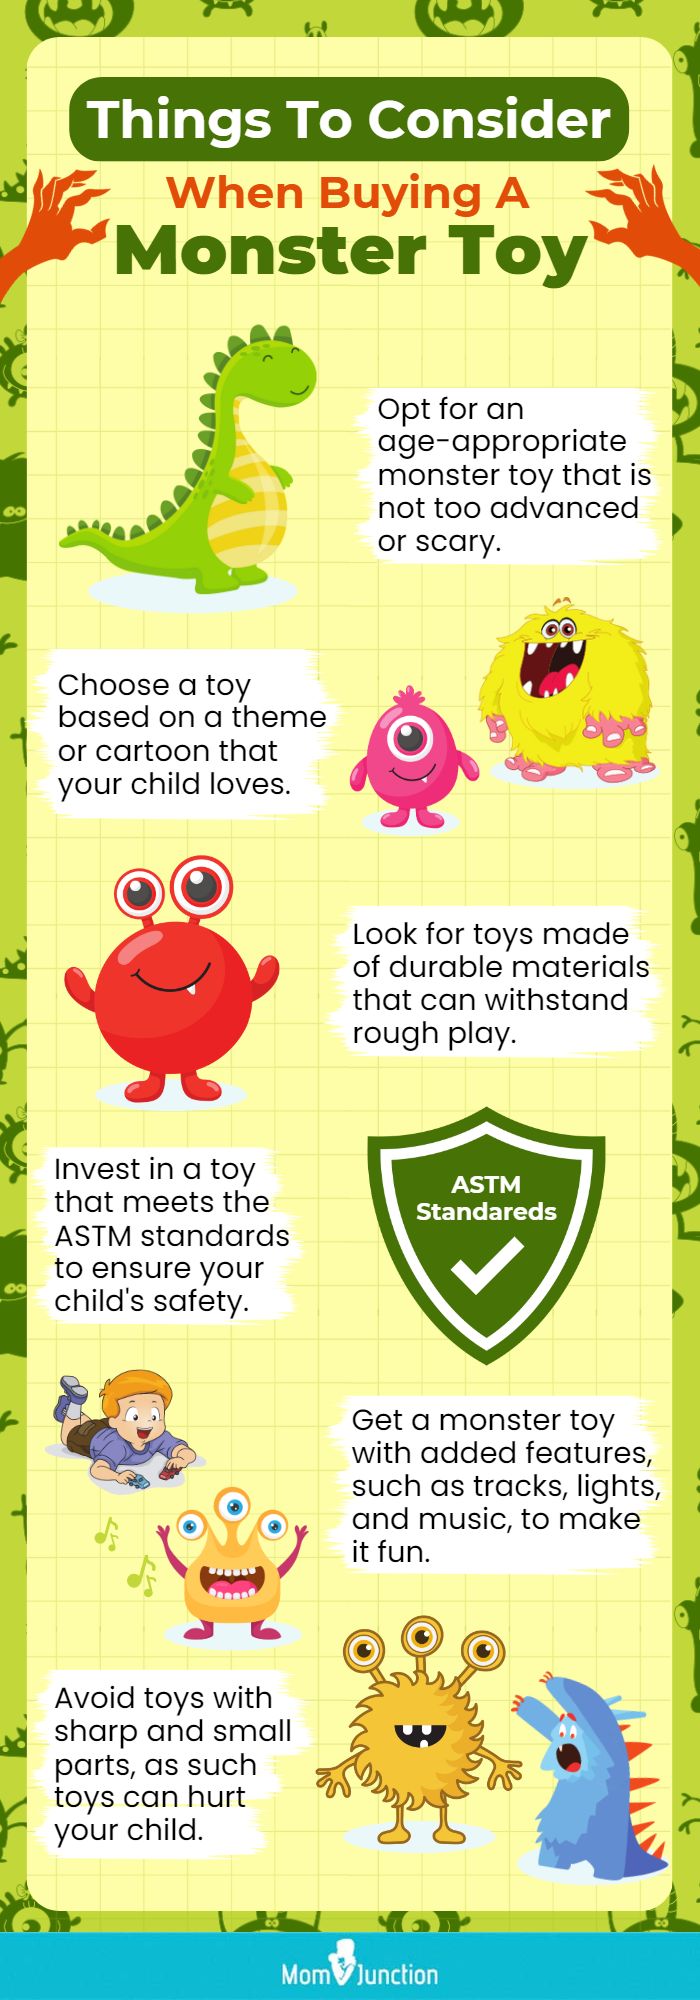 Things To Consider When Buying A Monster Toy